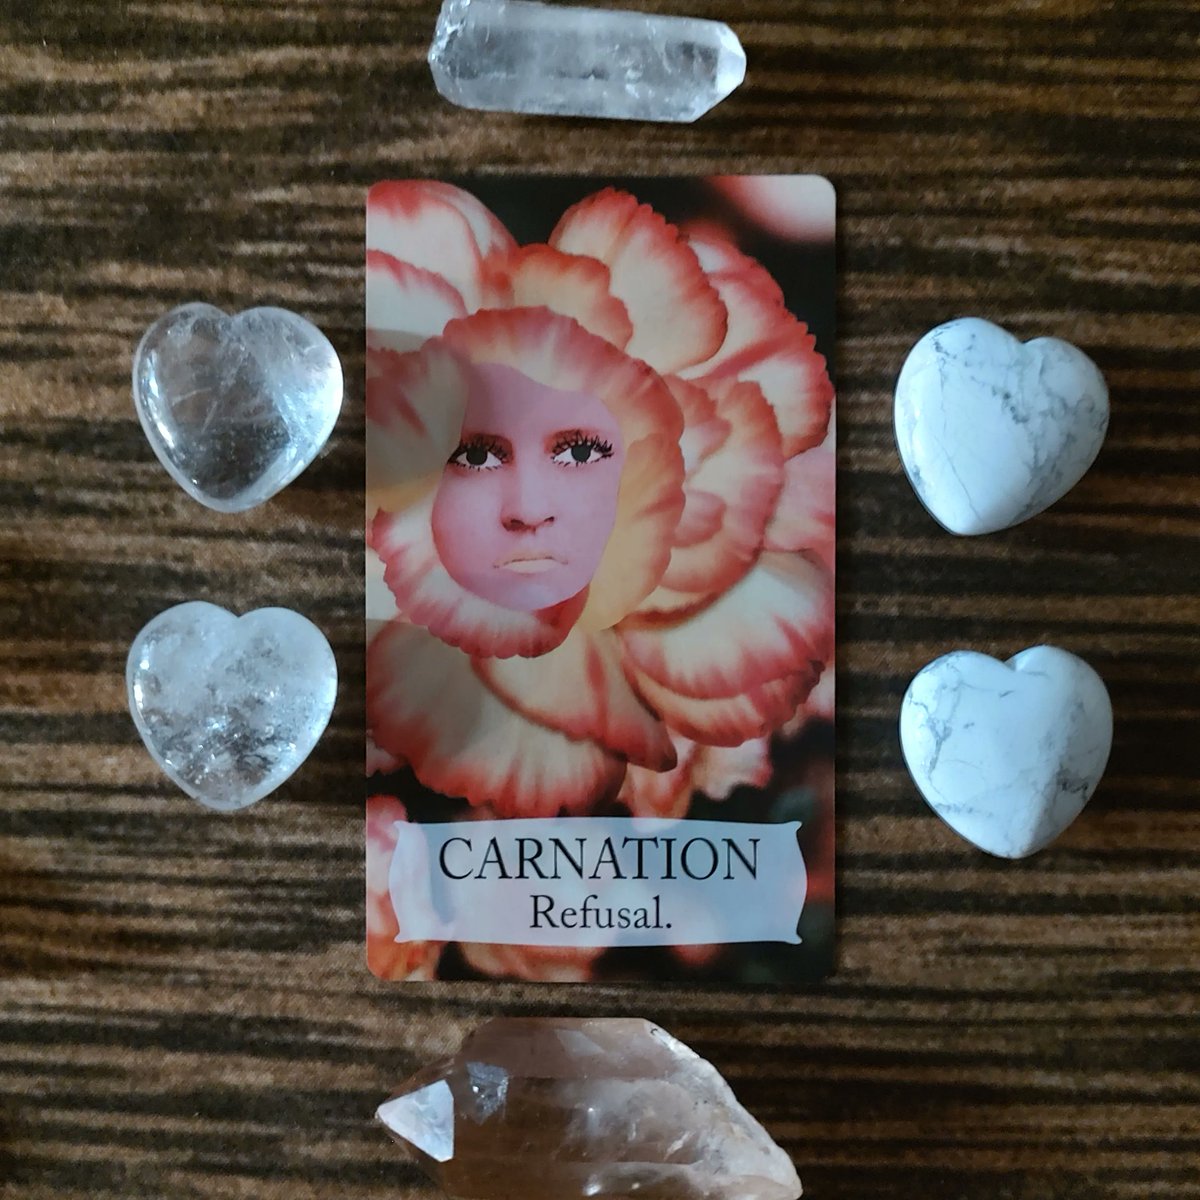 If someone attempts to push on your boundaries, consider whether you need someone that toxic or manipulative in your life. 
buff.ly/3LhSY4k 

#floriography #carnation #oraclecard #oracledeck #flowergoddess #tarot #languageofflowers #botanicaloracle